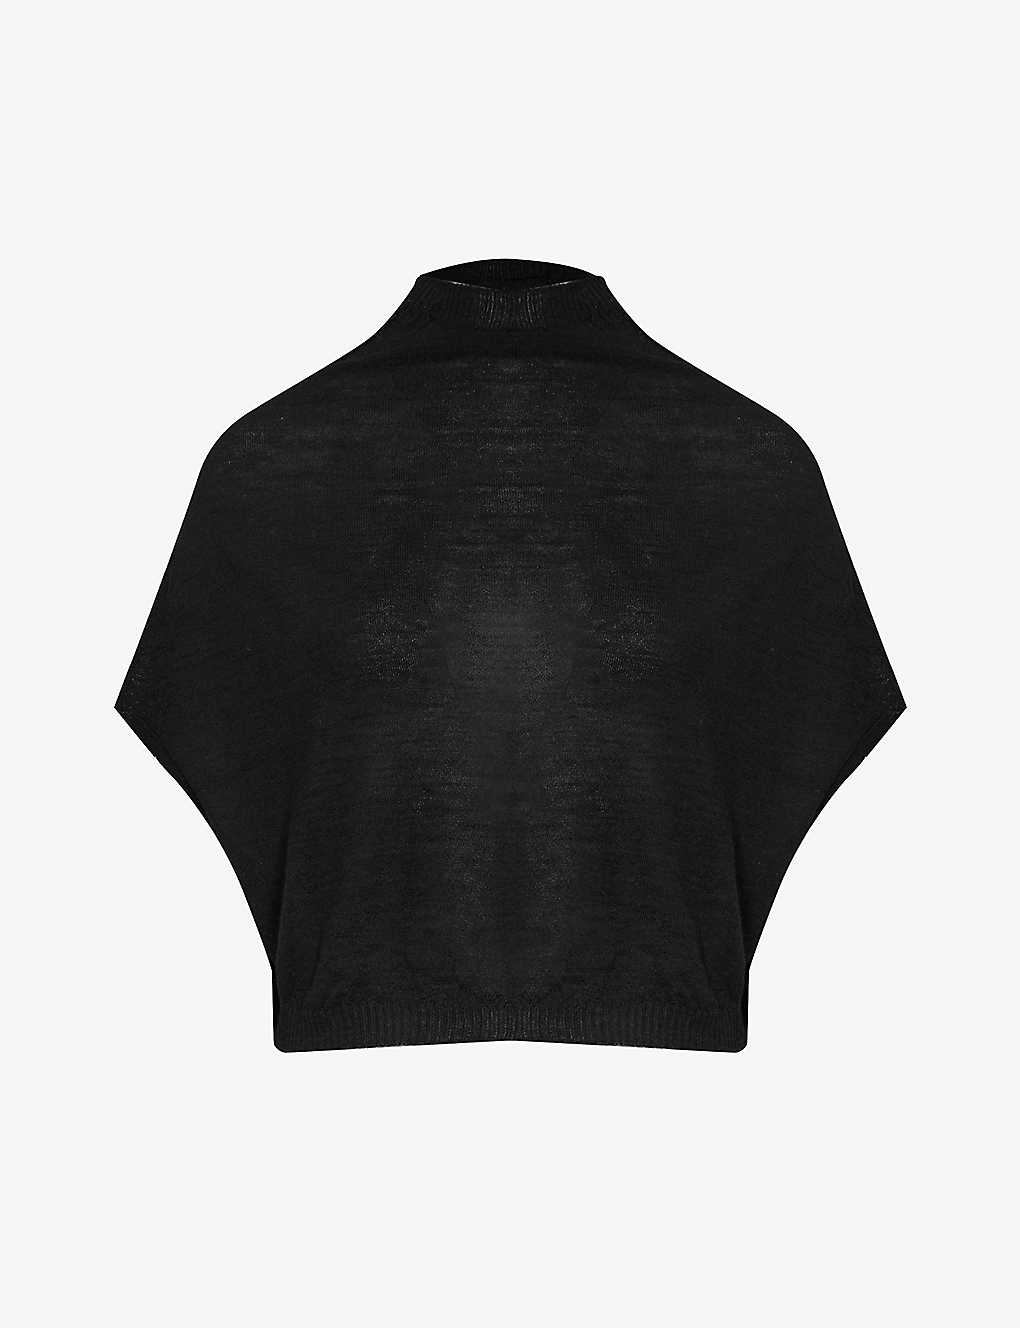 Shop Rick Owens Women's Black Dropped-shoulder Relaxed-fit Wool Knitted Top